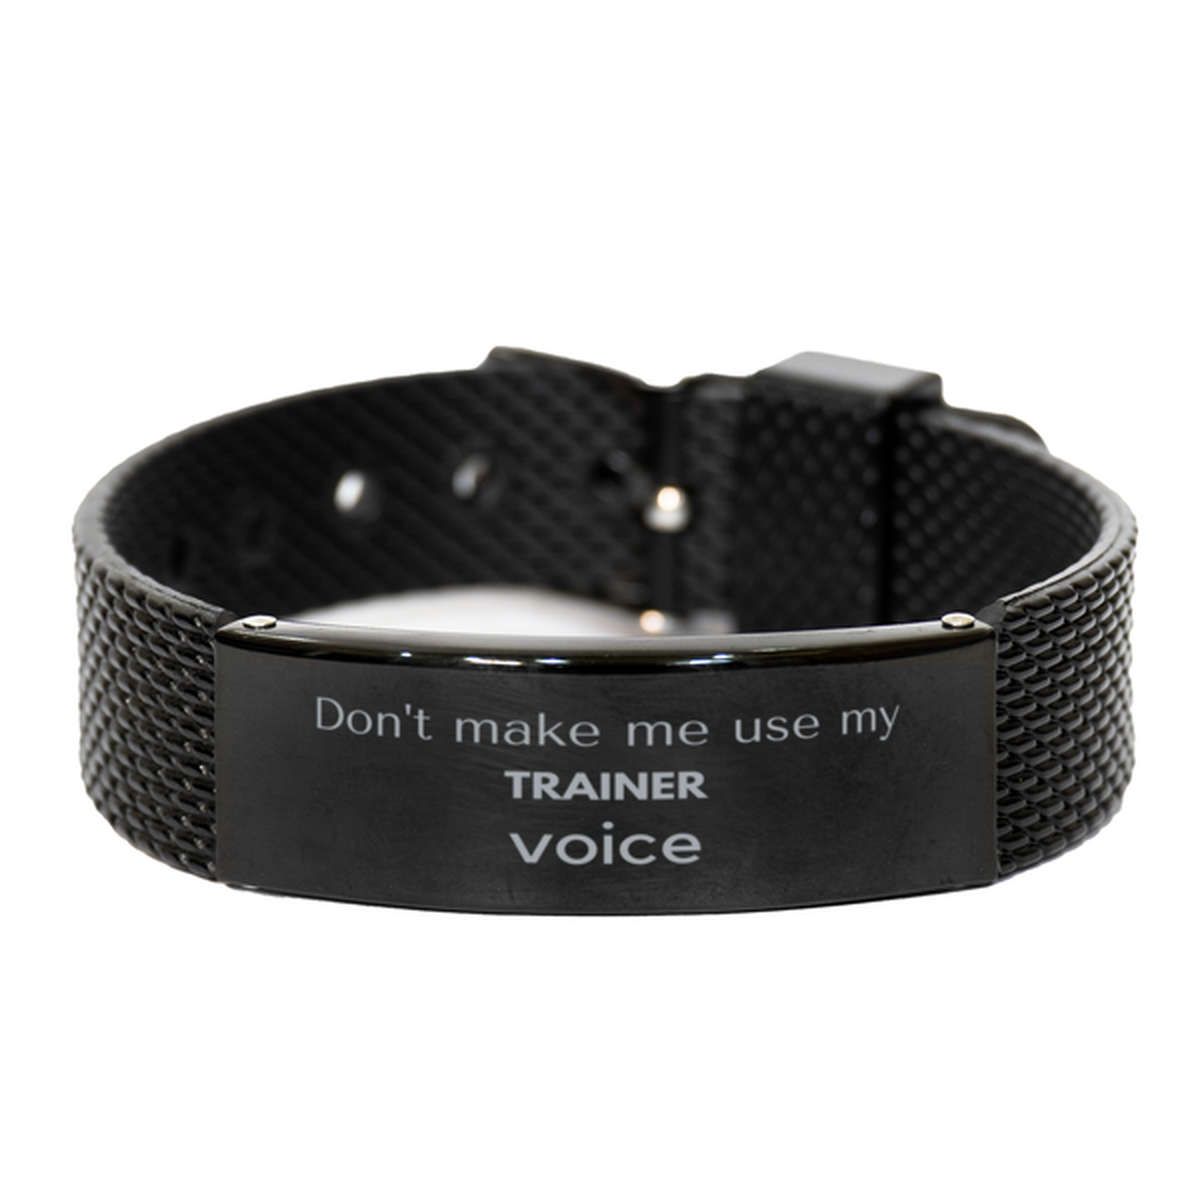 Don't make me use my Trainer voice, Sarcasm Trainer Gifts, Christmas Trainer Black Shark Mesh Bracelet Birthday Unique Gifts For Trainer Coworkers, Men, Women, Colleague, Friends